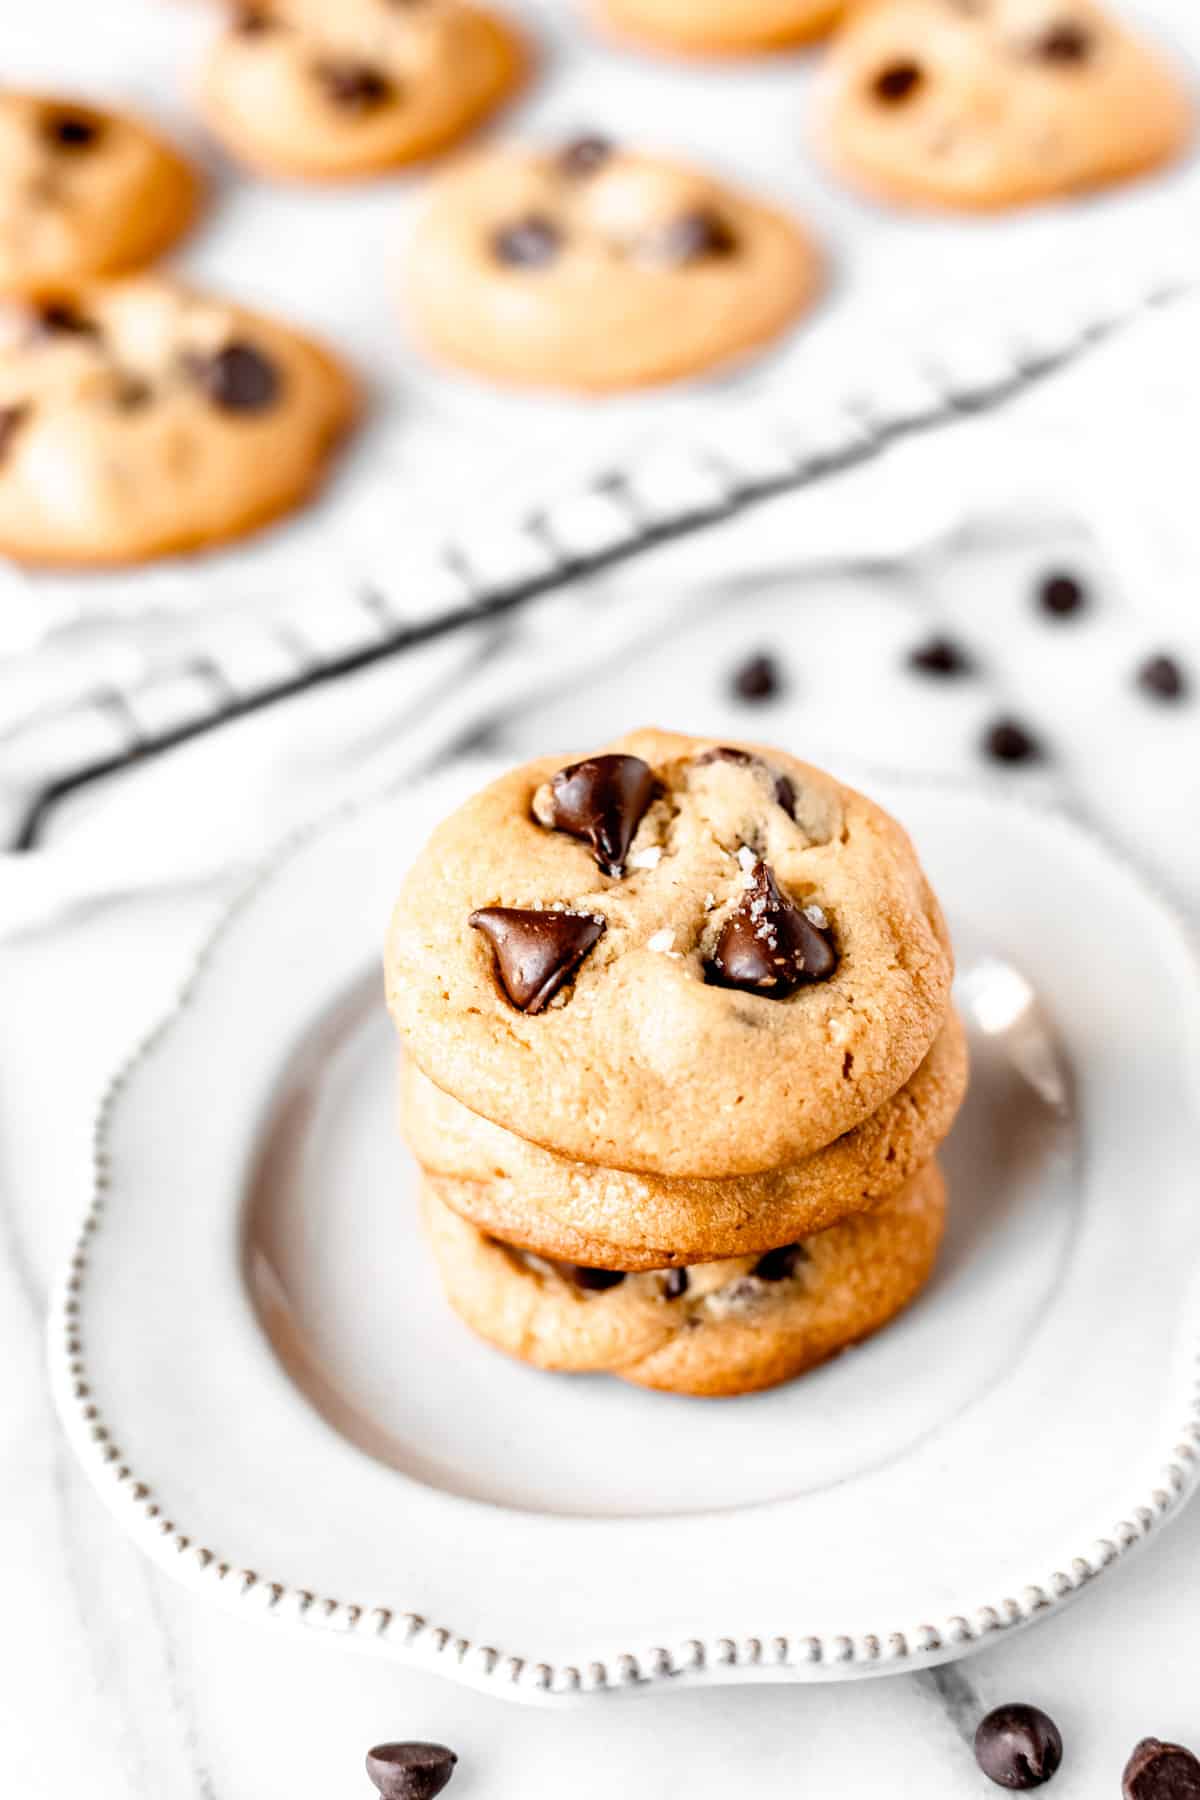 A stack of three dark chocolate chip cookies on a white plate with chocolate chips around it and a tray of more cookies in the background.